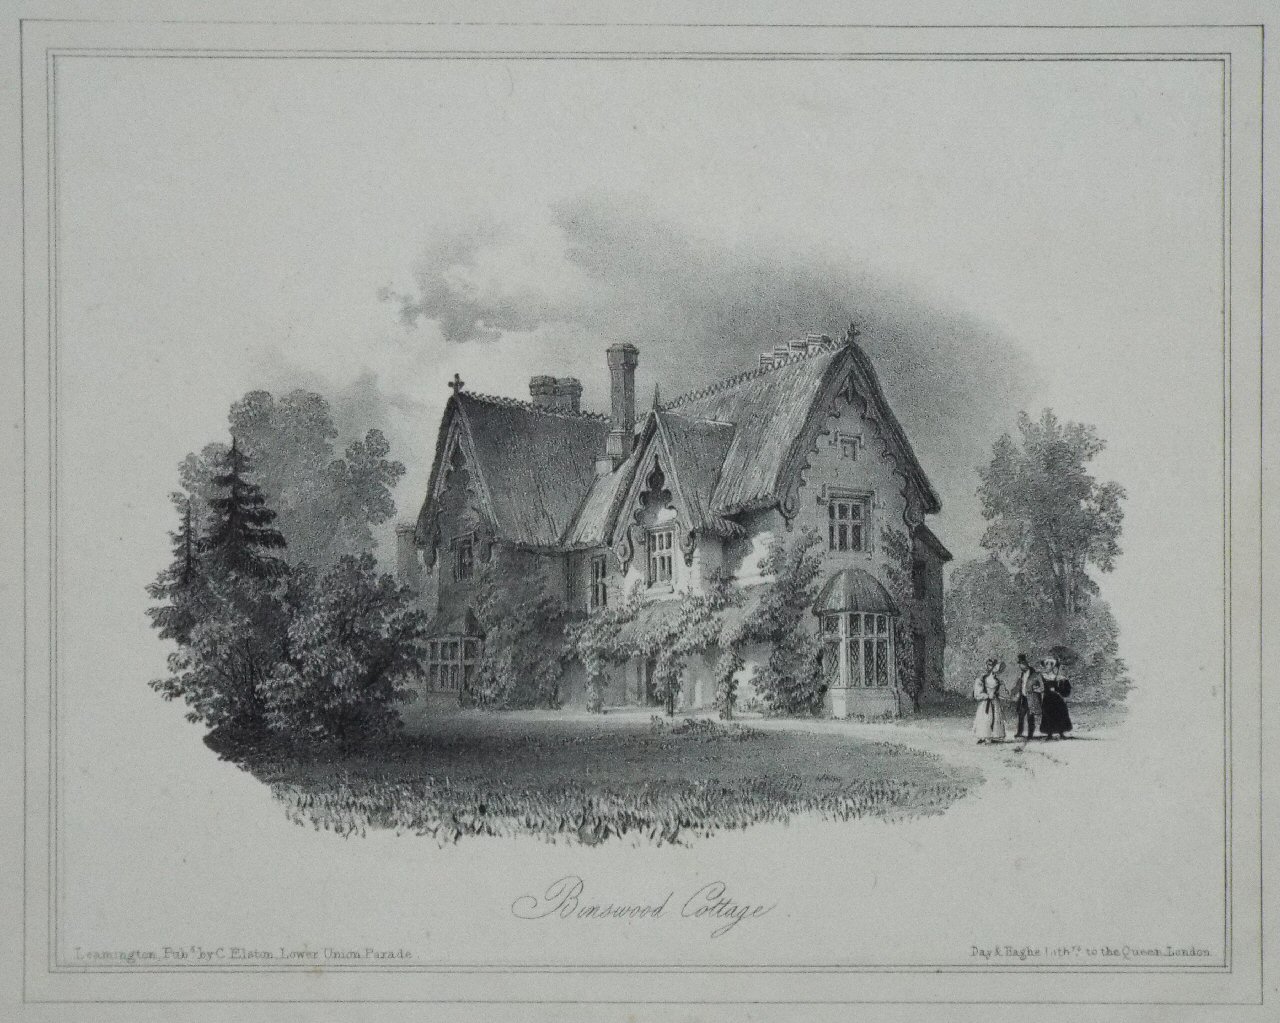 Lithograph - Binswood Cottage.